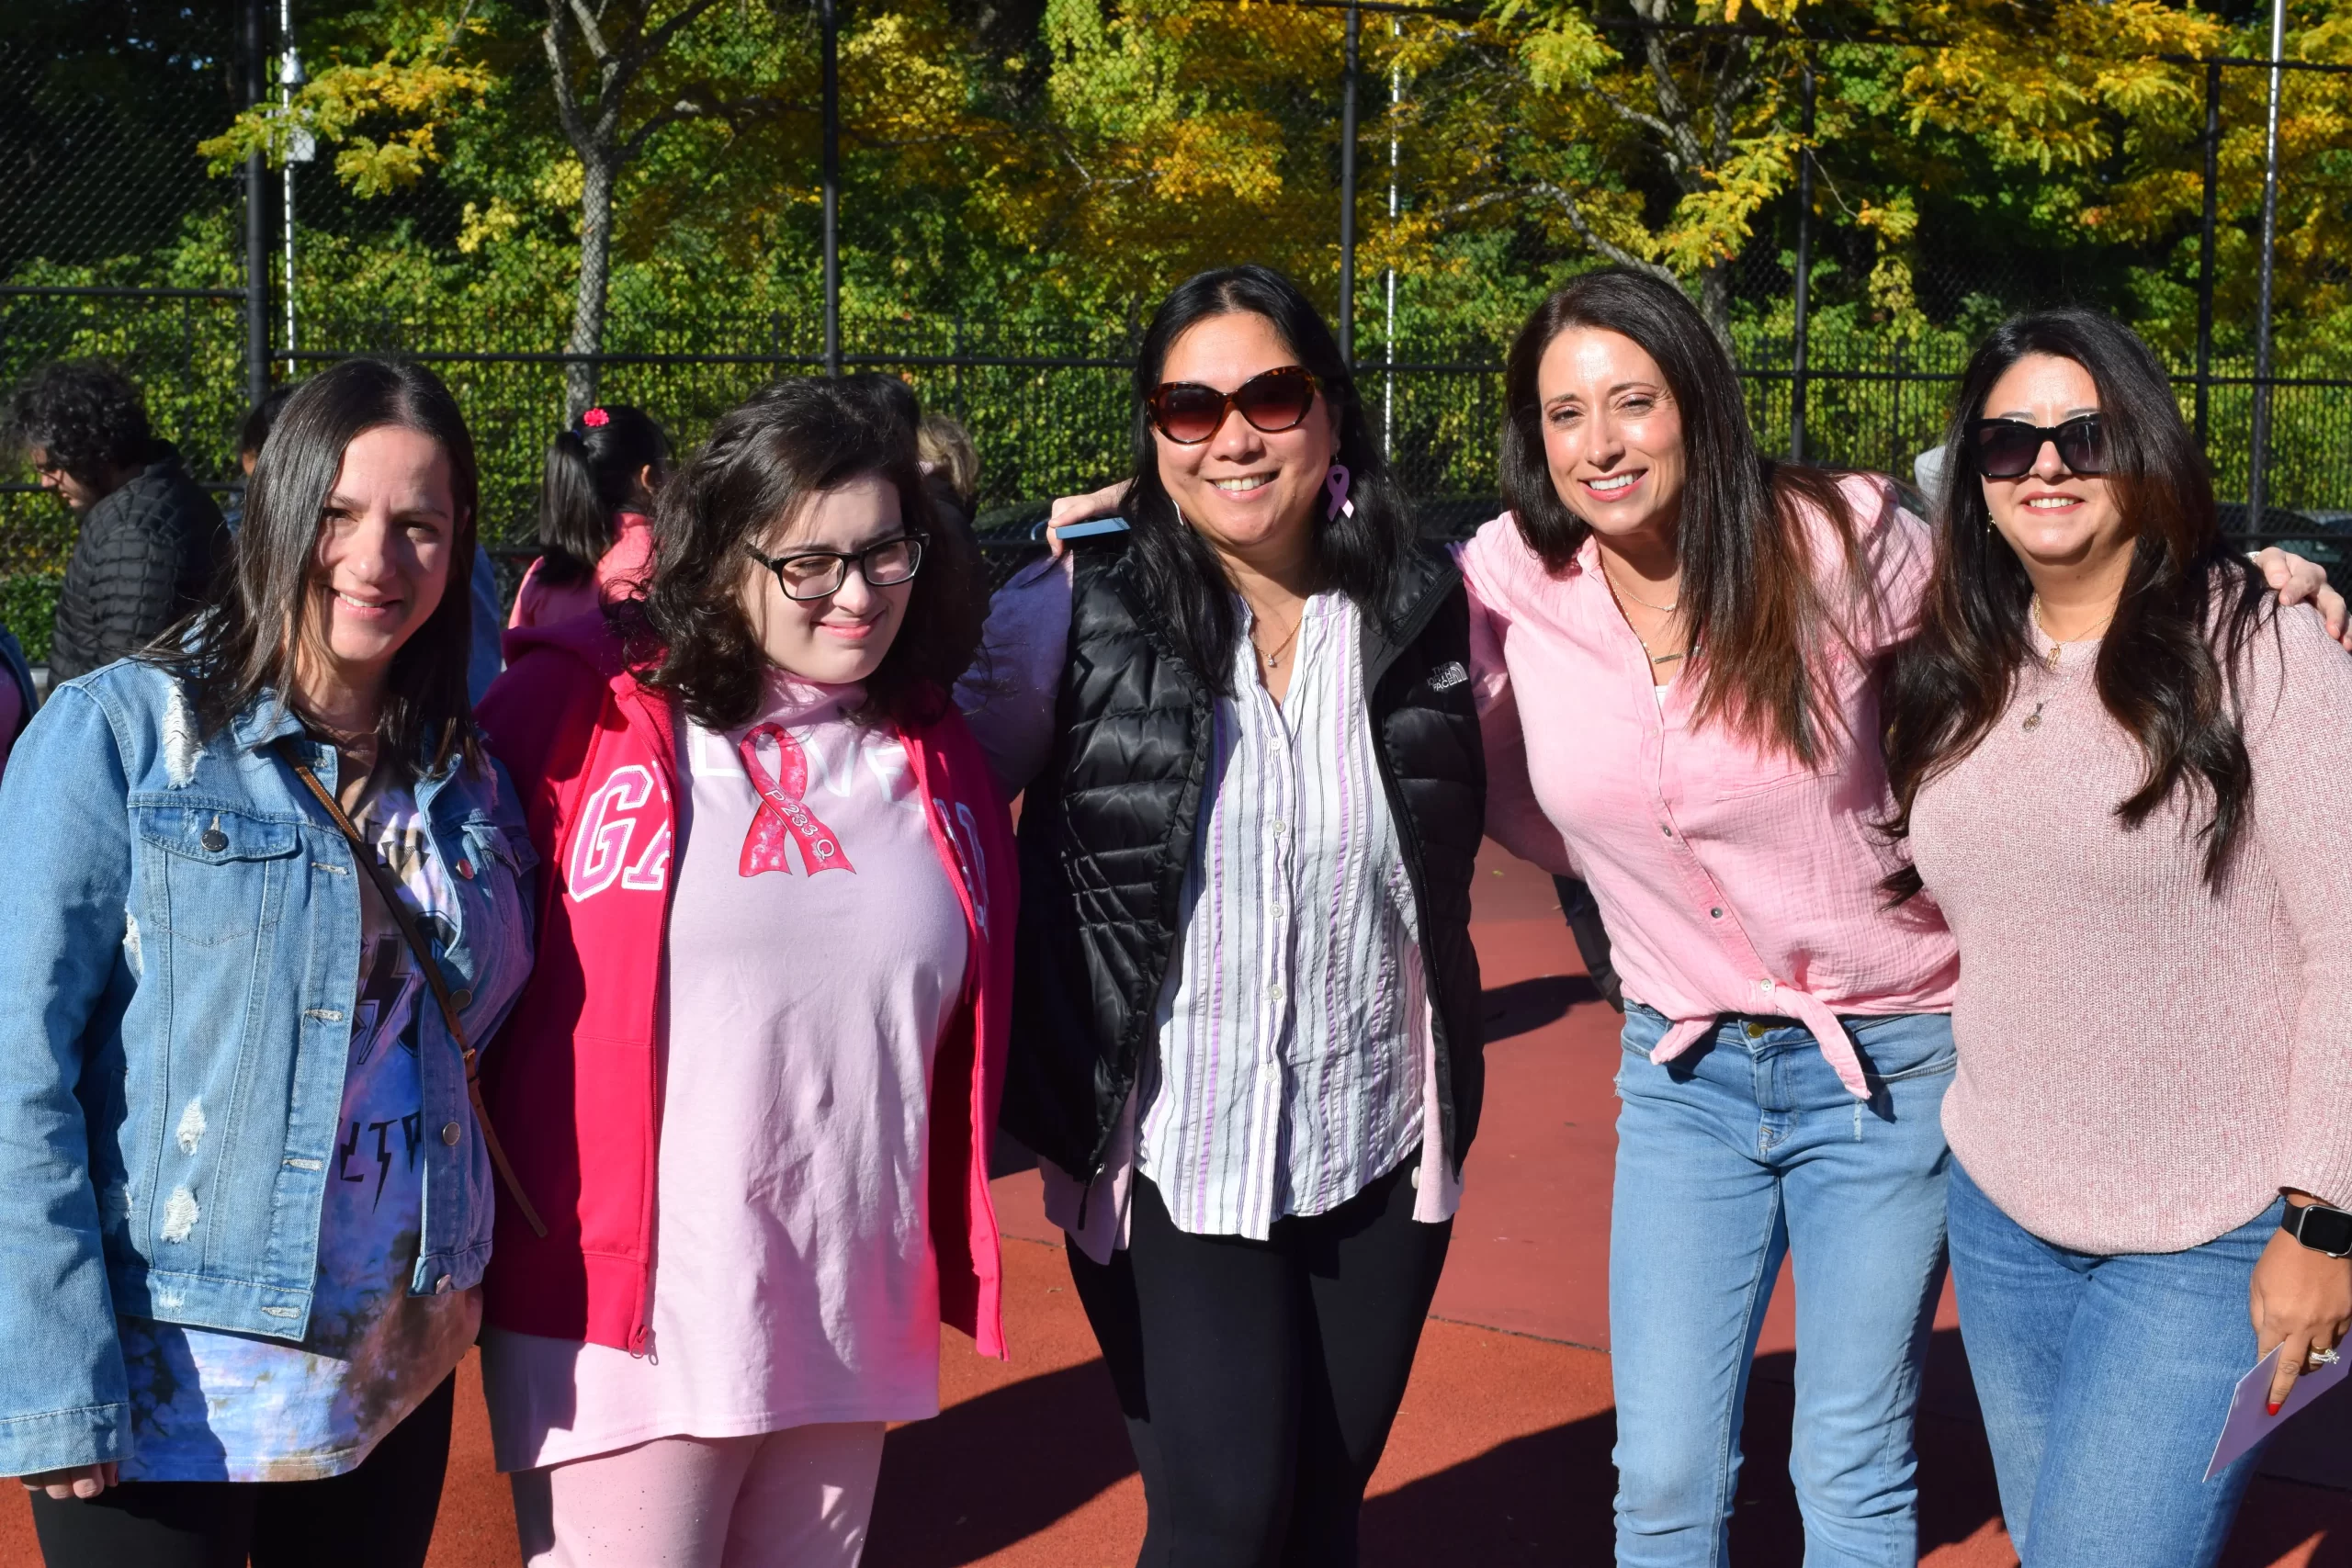 Student Kayla with her mom and teachers showing off their Pink shirts.